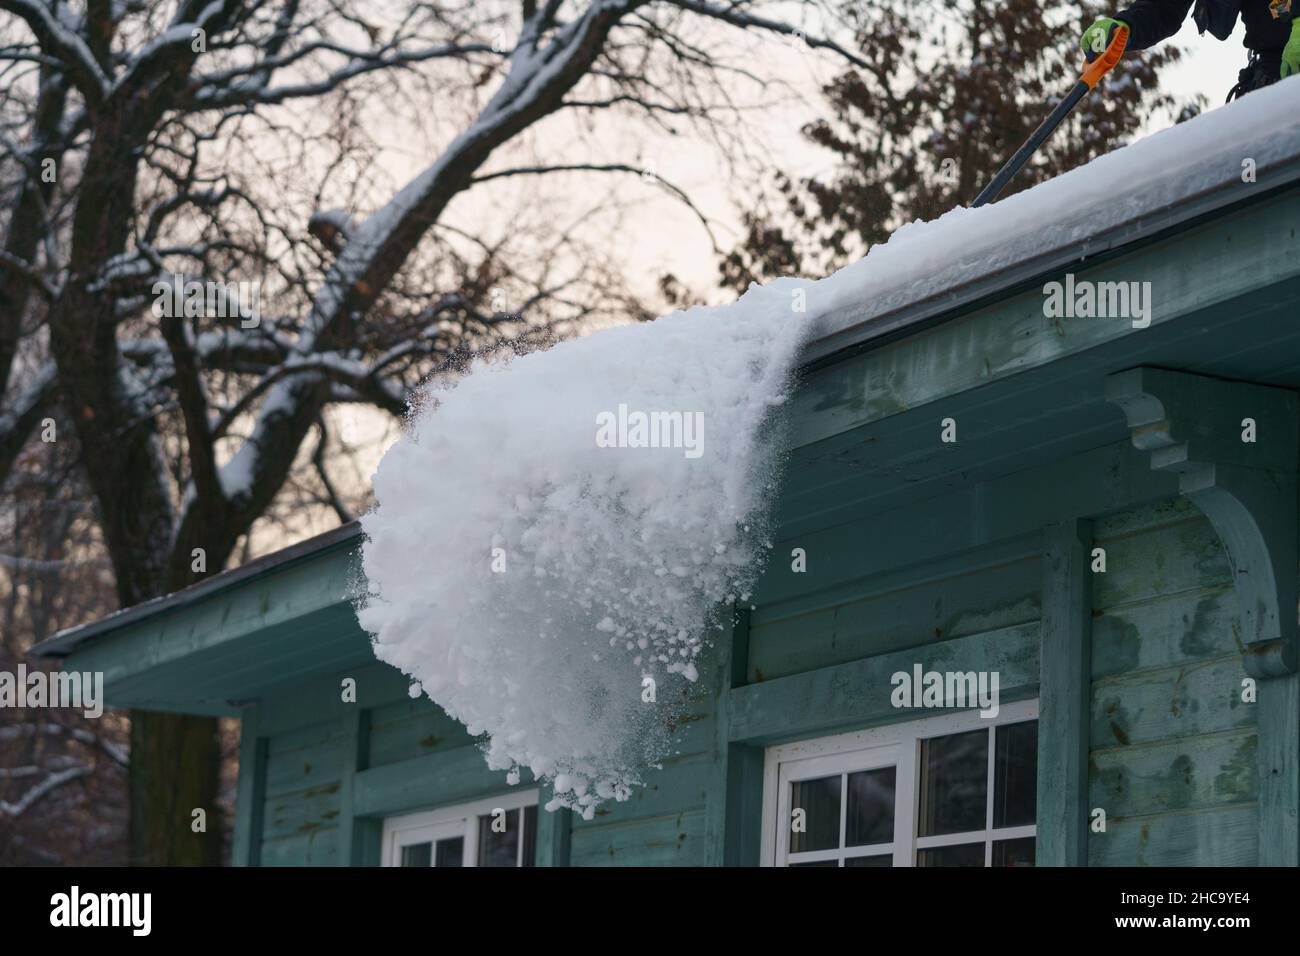 Ice dam prevention. Man holding shovel cleaning roof from snow, ice and icicles during wintertime Stock Photo